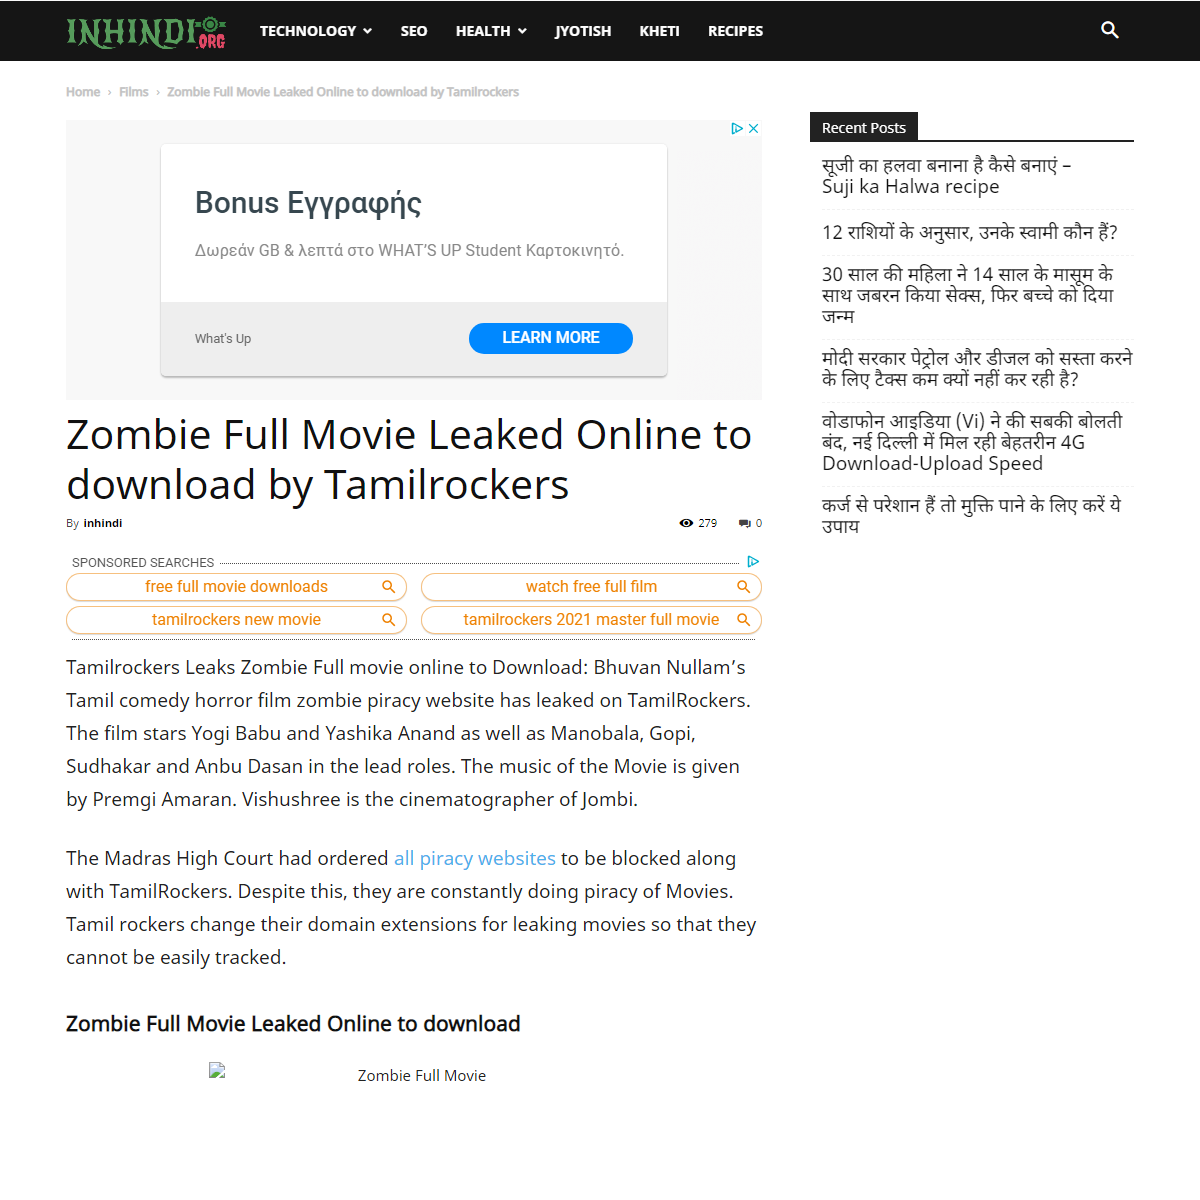 A complete backup of https://www.inhindi.org/zombie-full-movie-leaked-online/